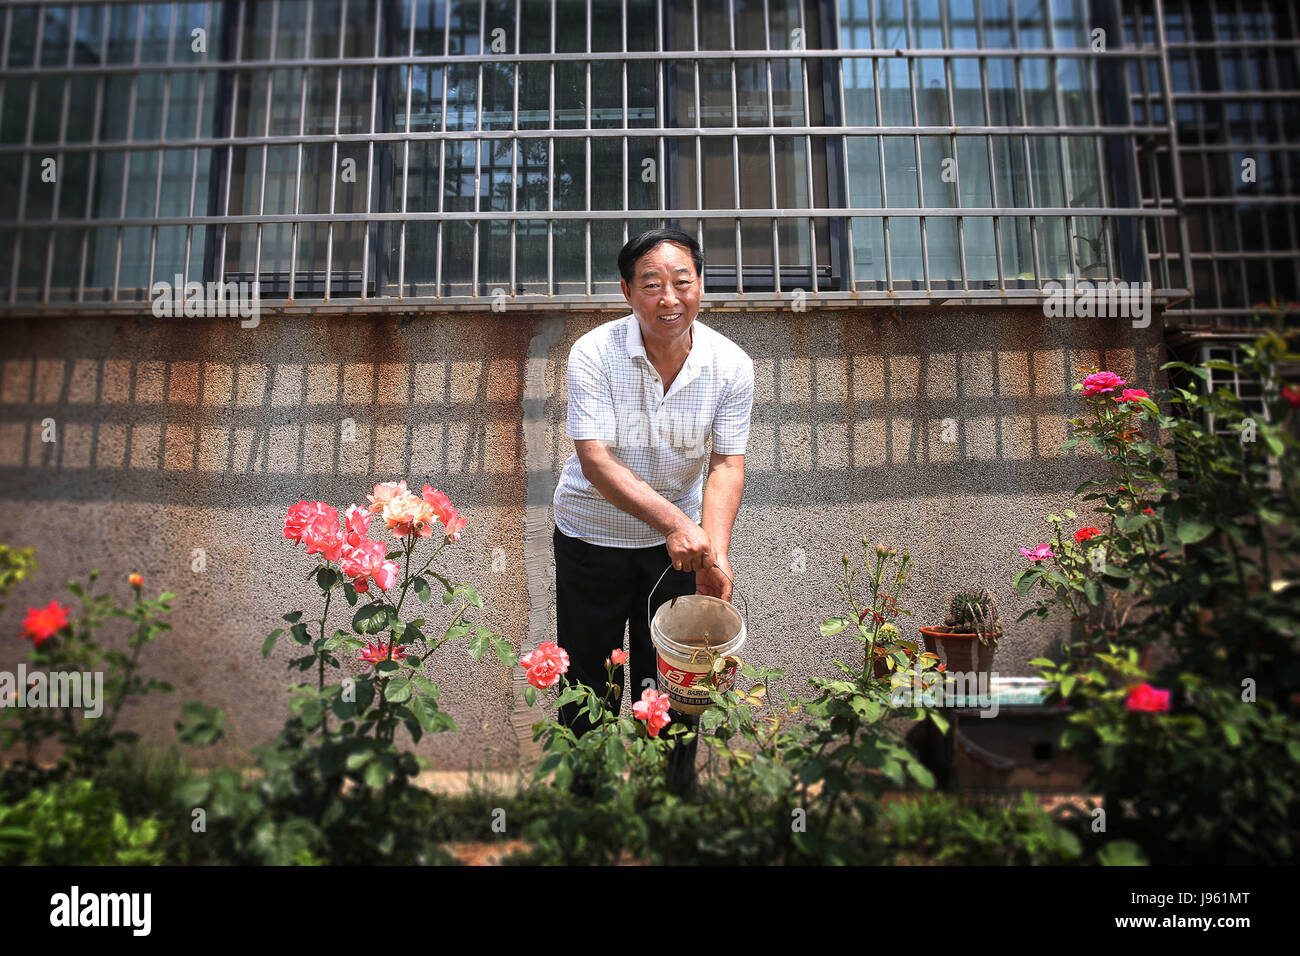 June 5, 2017 - Shijiazhuan, Shijiazhuan, China - Shijiazhuang, CHINA-June 5 2017: (EDITORIAL USE ONLY. CHINA OUT) The 62-year-old man Zheng Chunfu, attended the national college entrance examination in 1977. He didn't enter his dream school and tried again the next year. Now he has retired from the local court in Shijiazhuang, north China's Hebei Province. The national college entrance examination of 2017, known as gaokao, will starts on June 7th. The National College Entrance Examination was restored in 1977, which changed the fates of several generations in China. The photos depict stories o Stock Photo